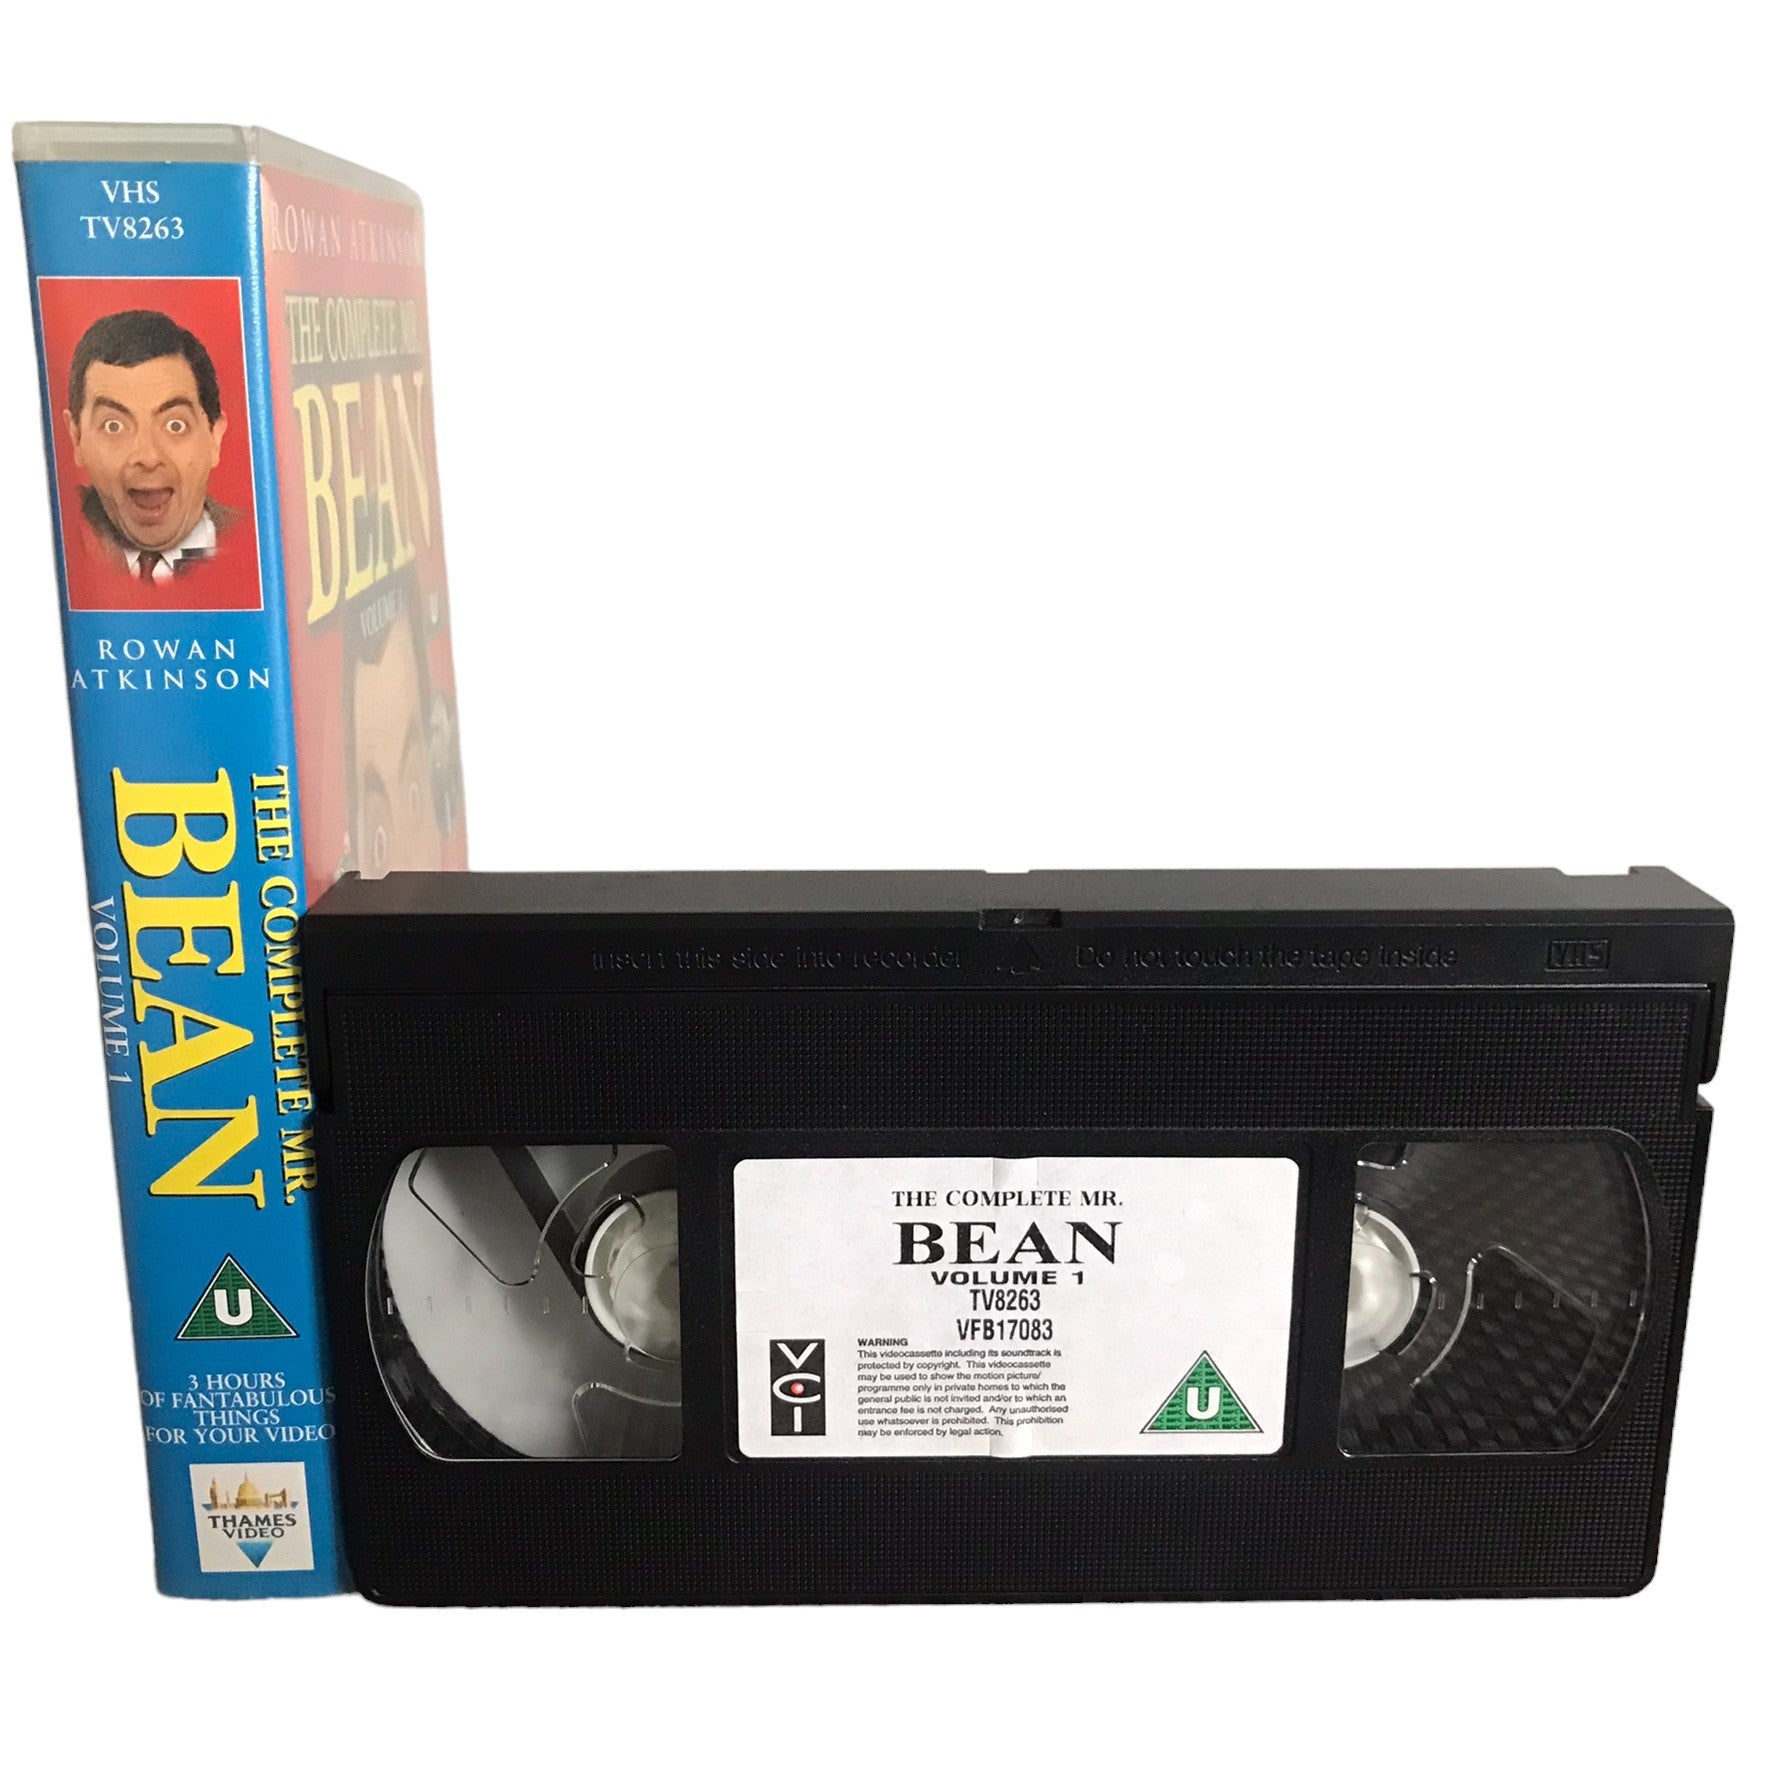 The Complete Mr. Bean - Volume 1 - Robin Driscoll - VCI - Childrens - Pal - VHS-